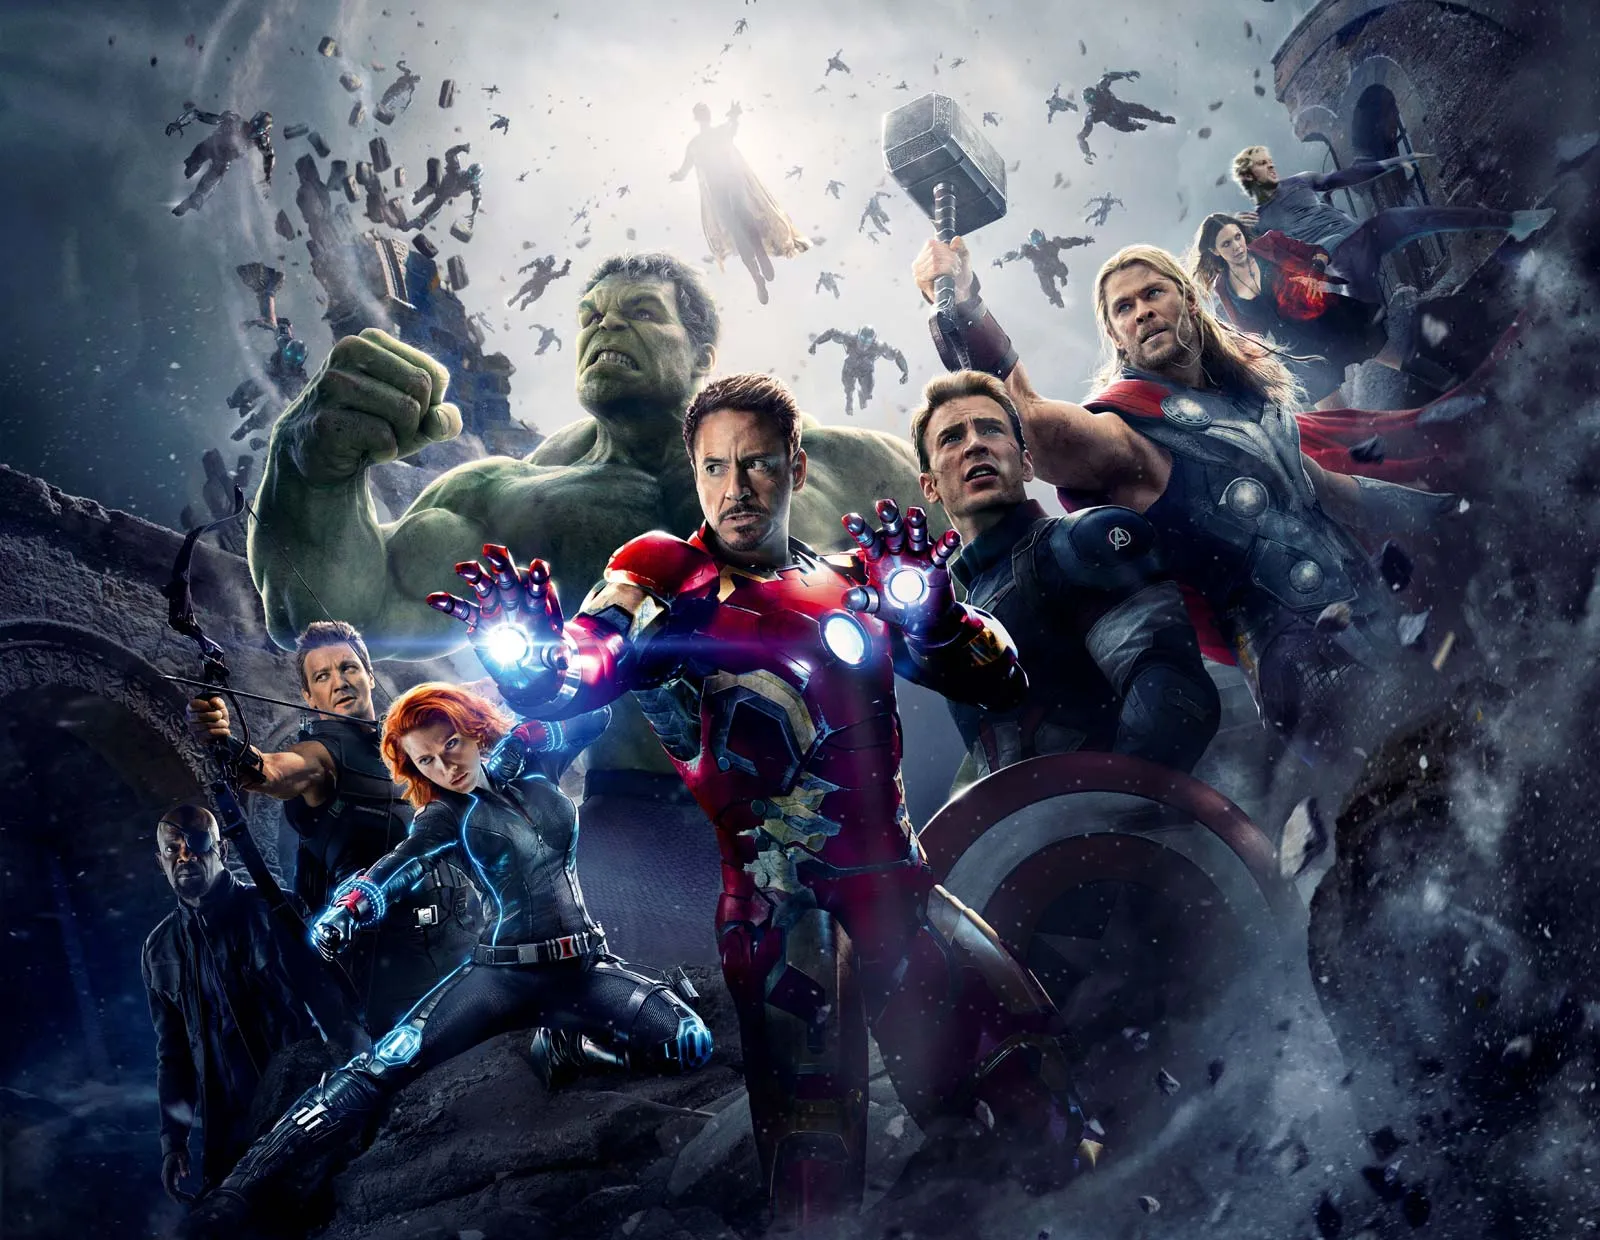 Two new 'Avengers' films coming to Marvel's slate